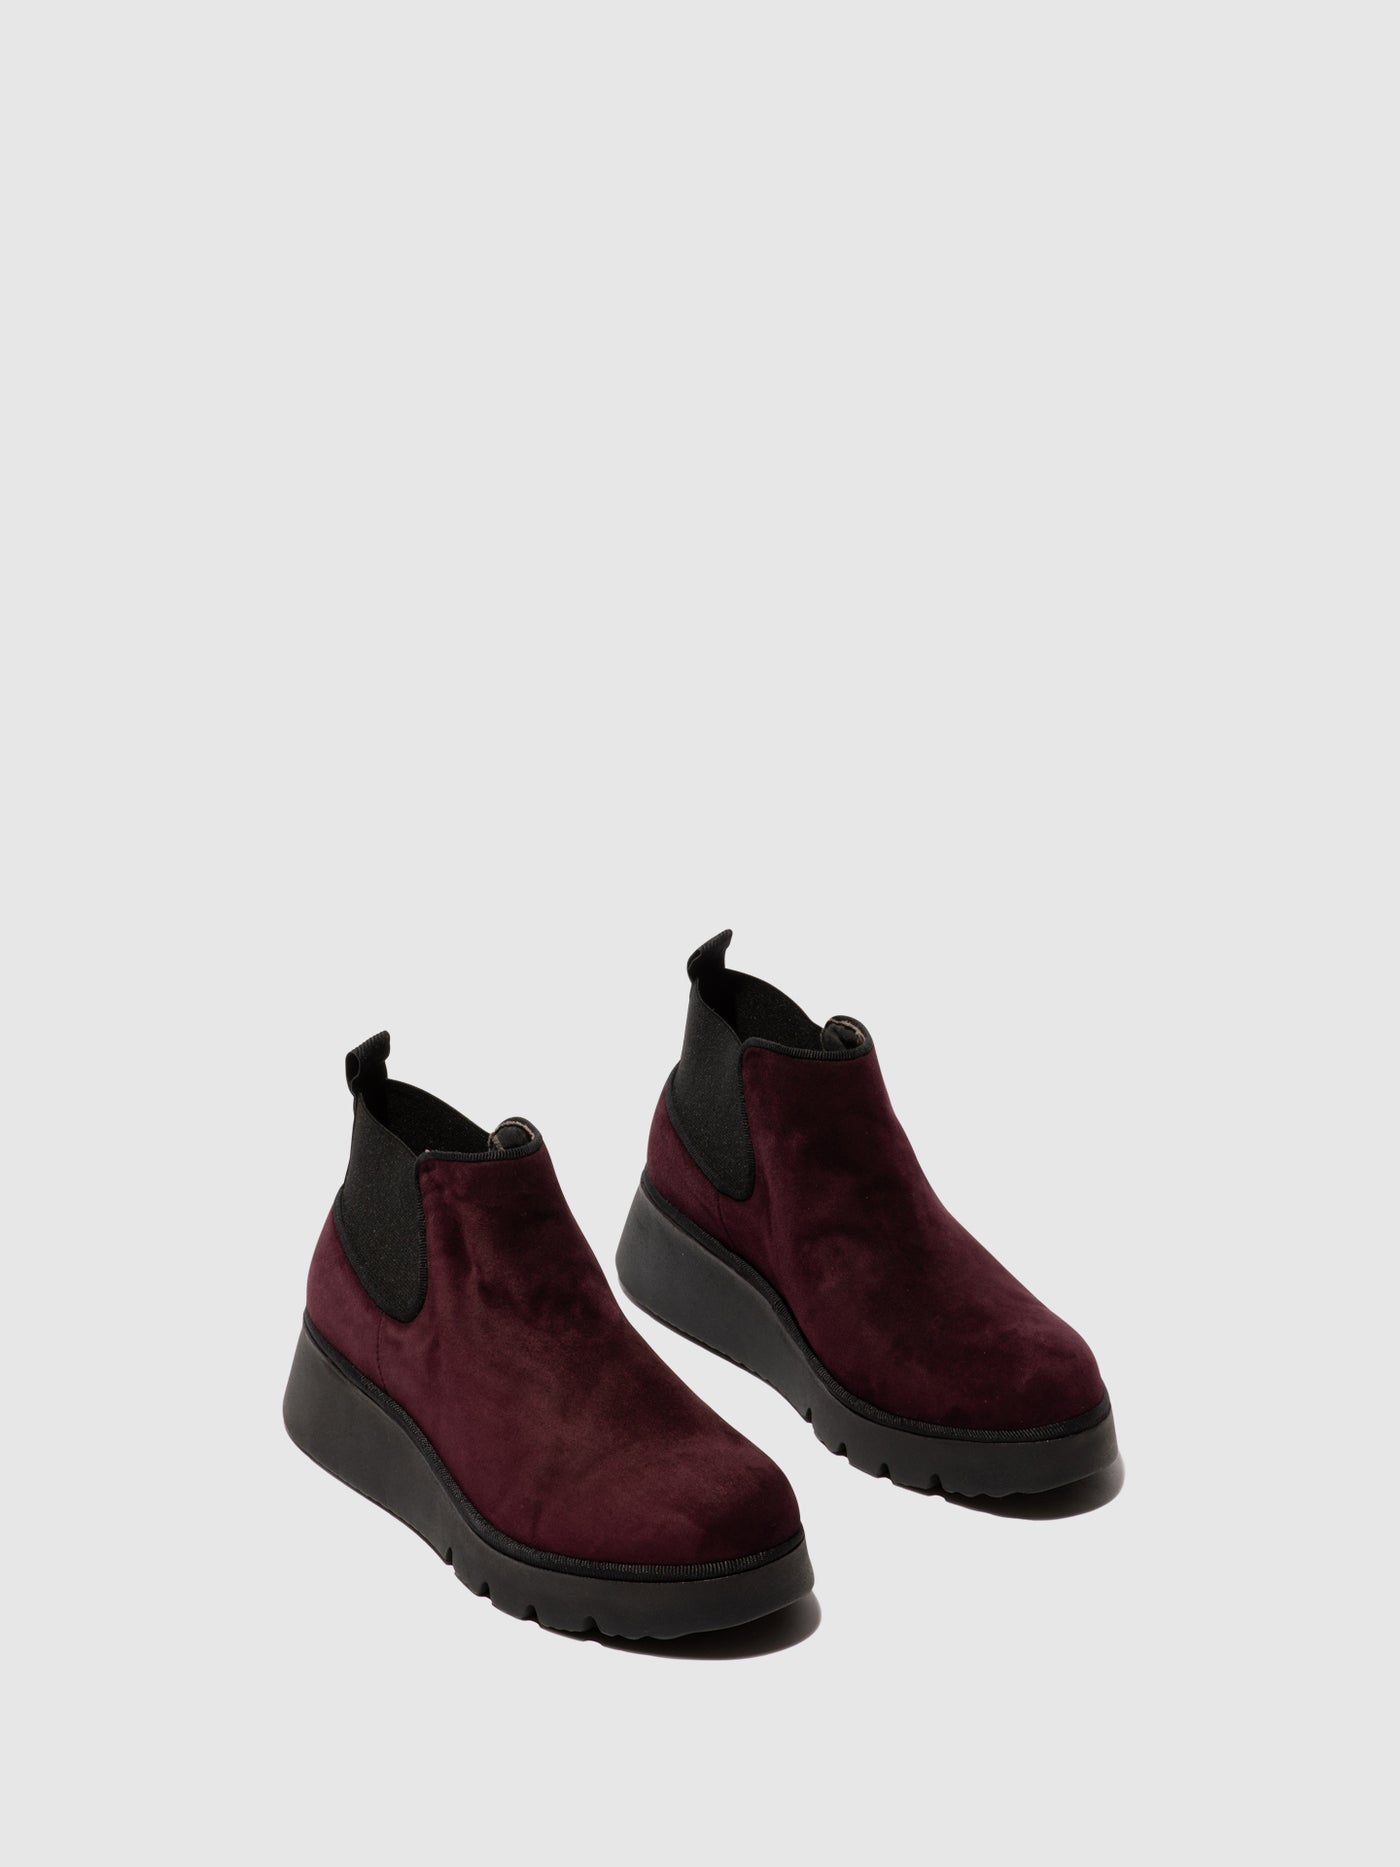 Elasticated Ankle Boots PADA403FLY KID SUEDE WINE